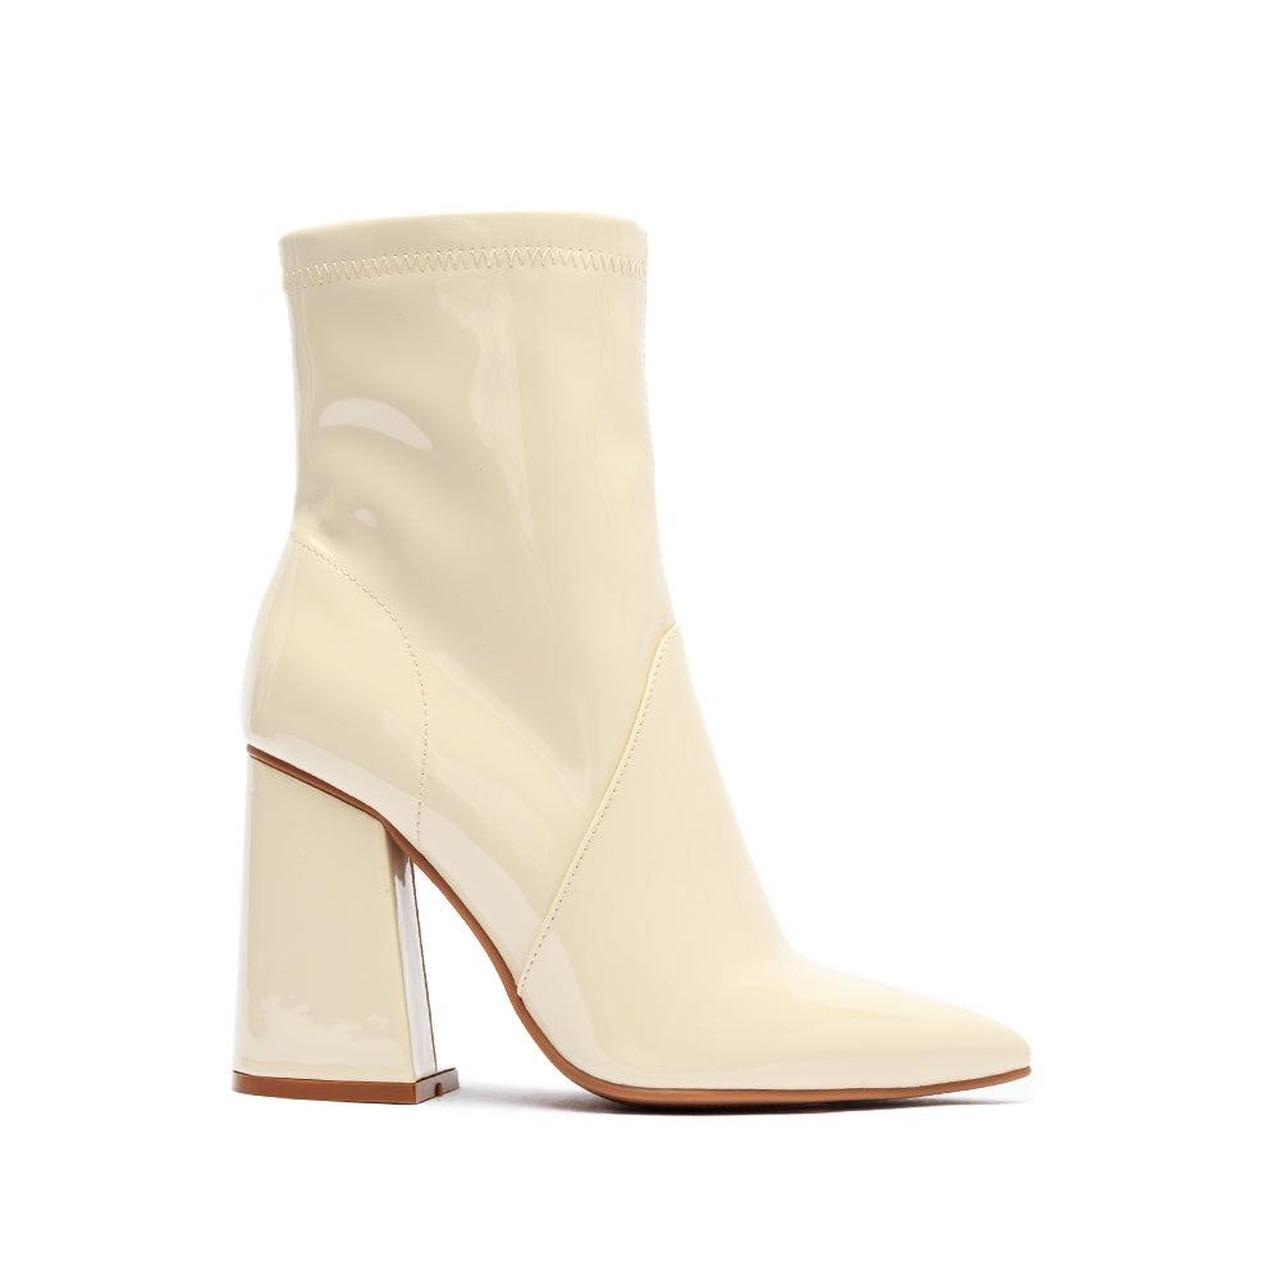 Cream white vegan patent leather ankle boots, with a... - Depop